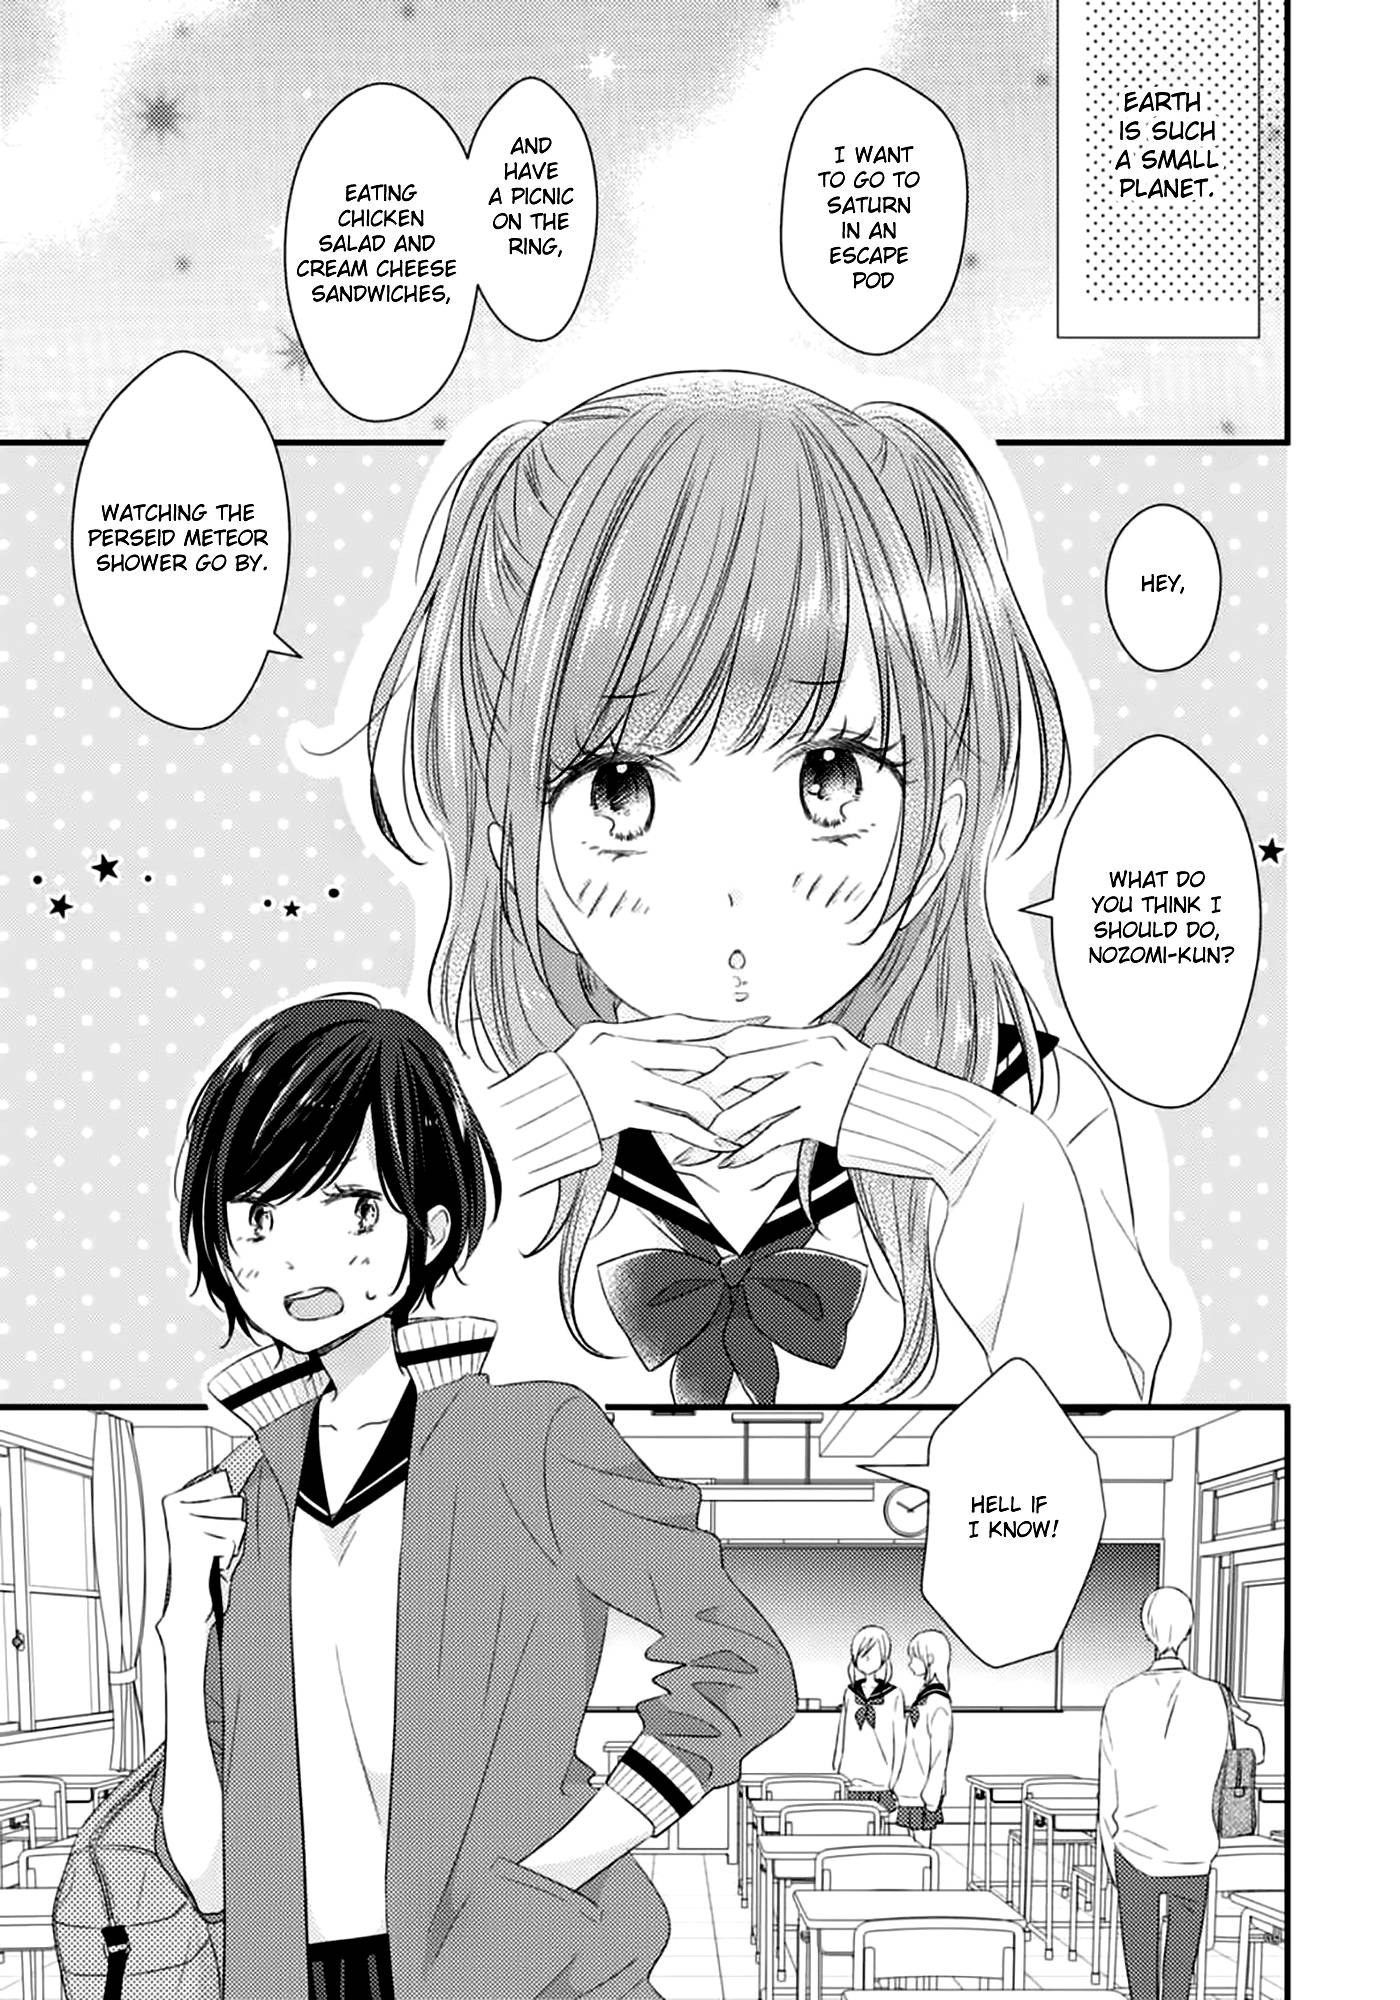 I Don't Know Why, But I Suddenly Wanted To Have Sex With My Coworker Who Sits Next To Me - chapter 2 - #5